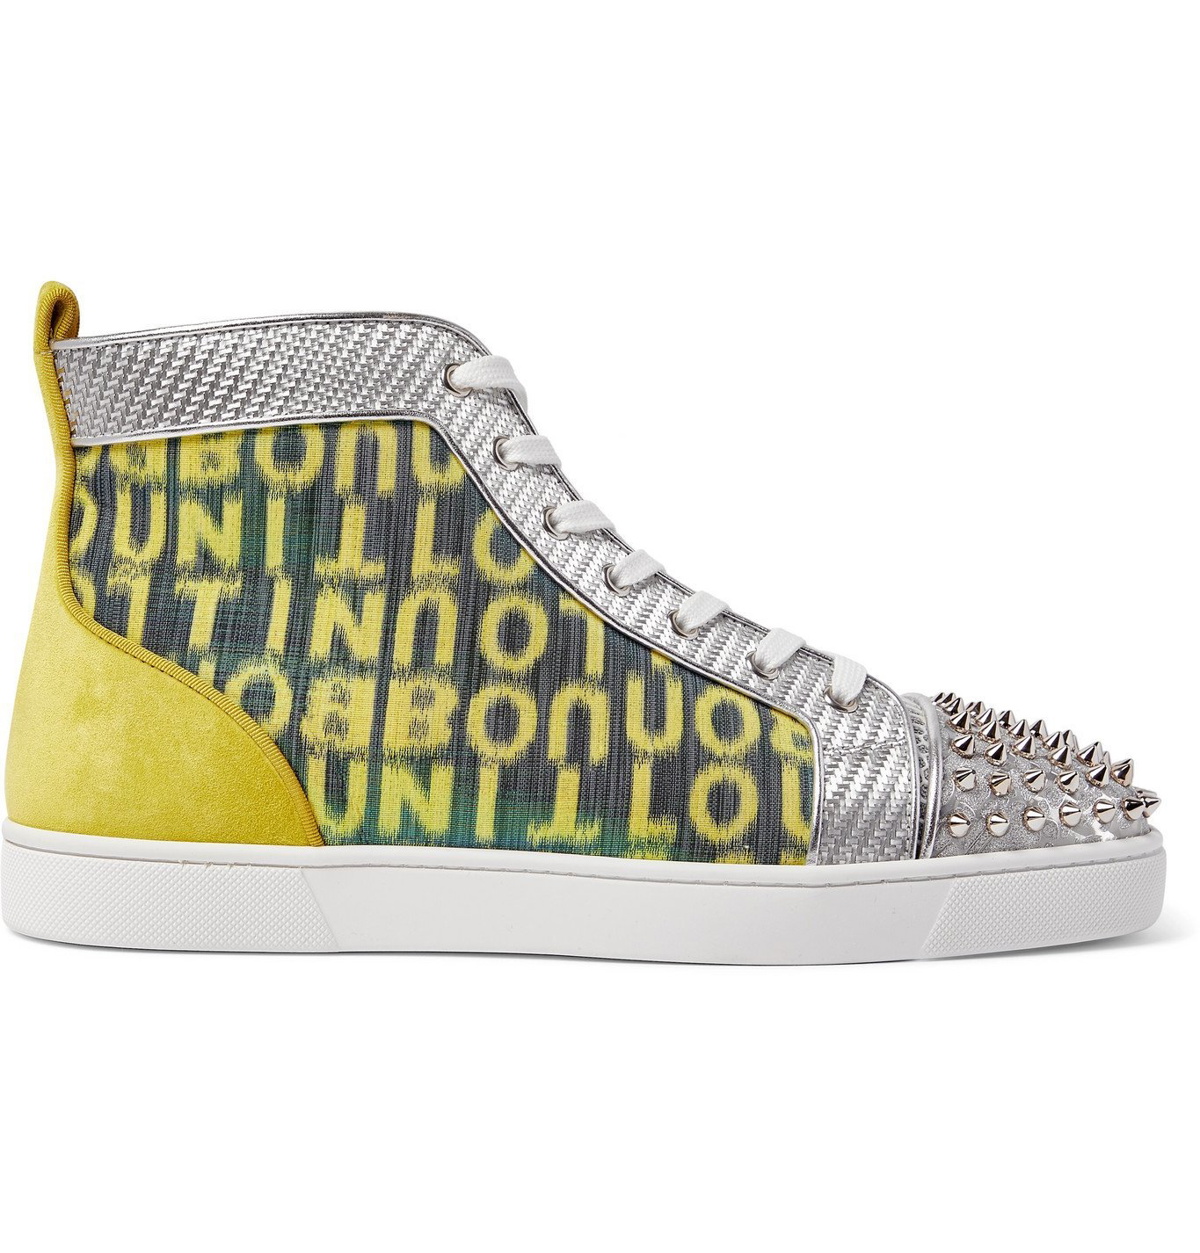 Christian Louboutin Yellow Suede Louis Spikes High Top Sneakers